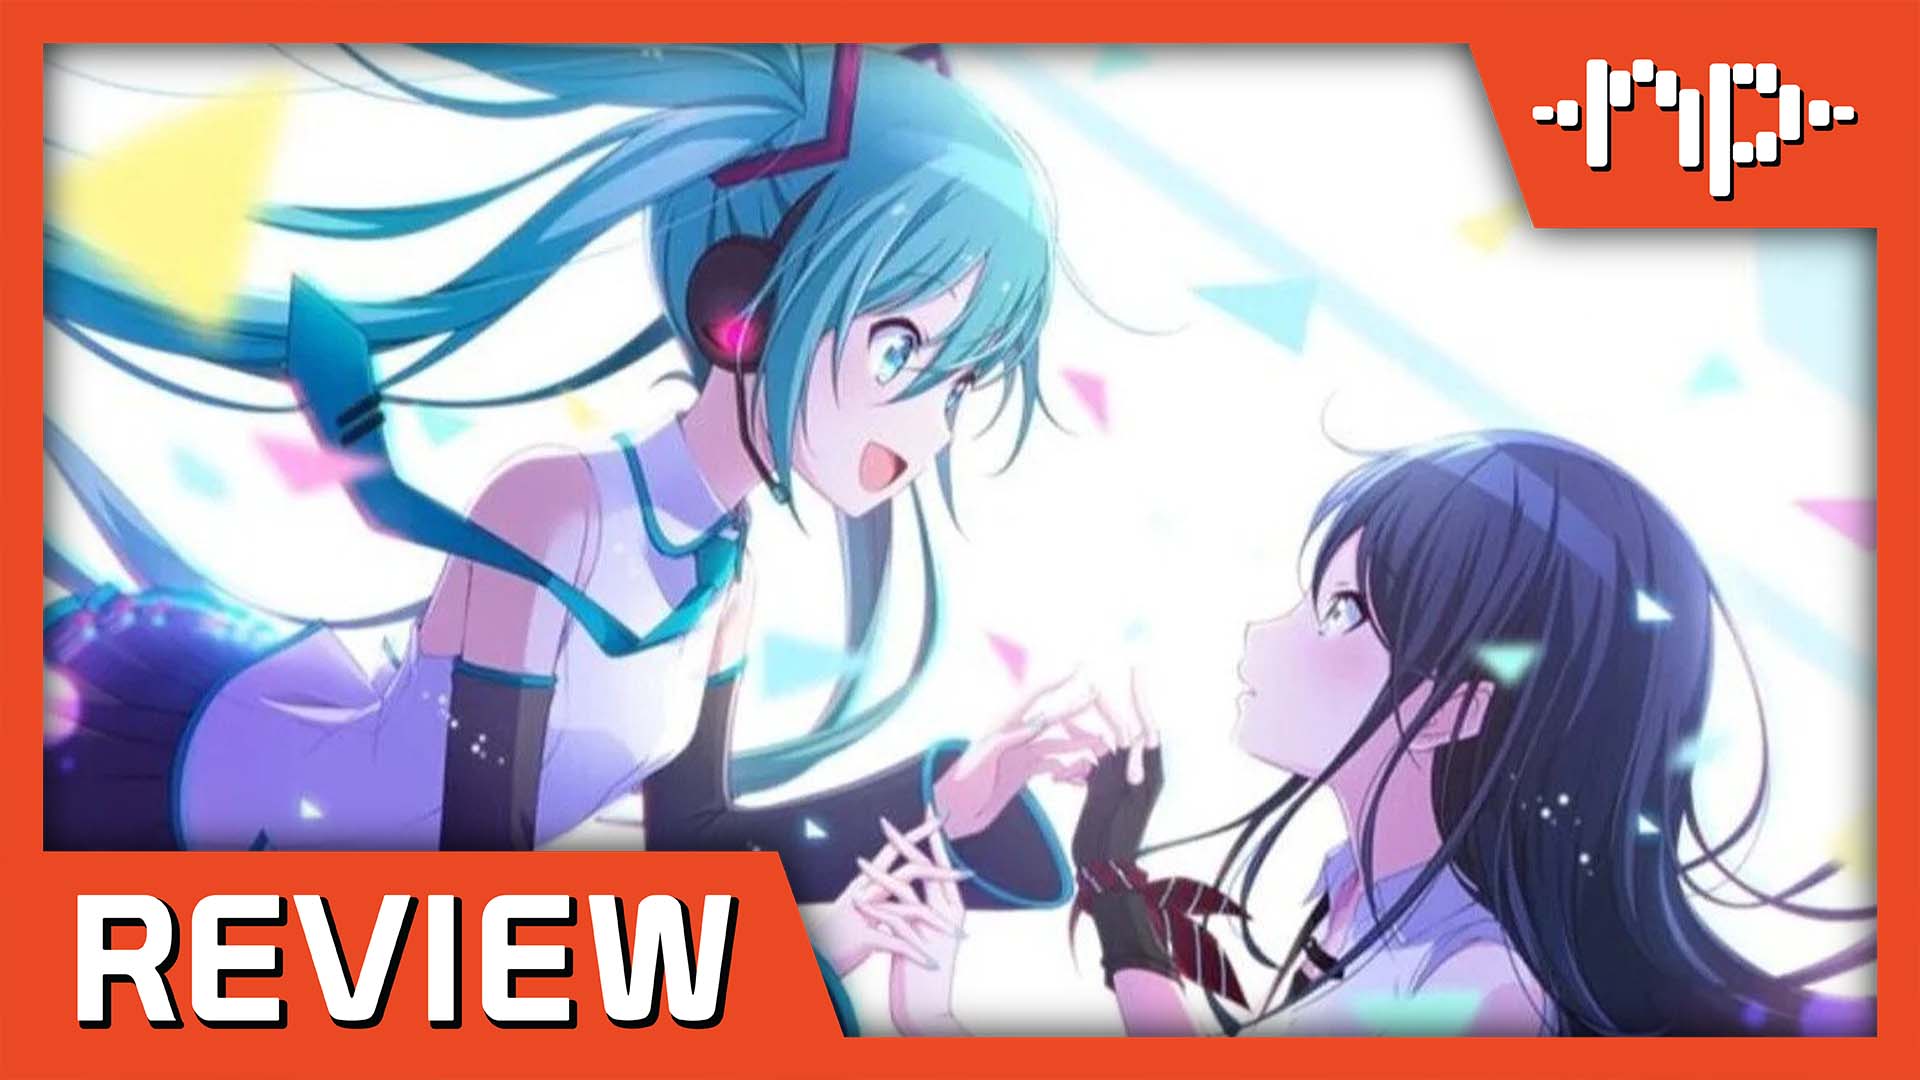 Hatsune Miku: Colorful Stage! Review – A Rhythm Gacha That has you Cheerfully Swinging Your Glowsticks